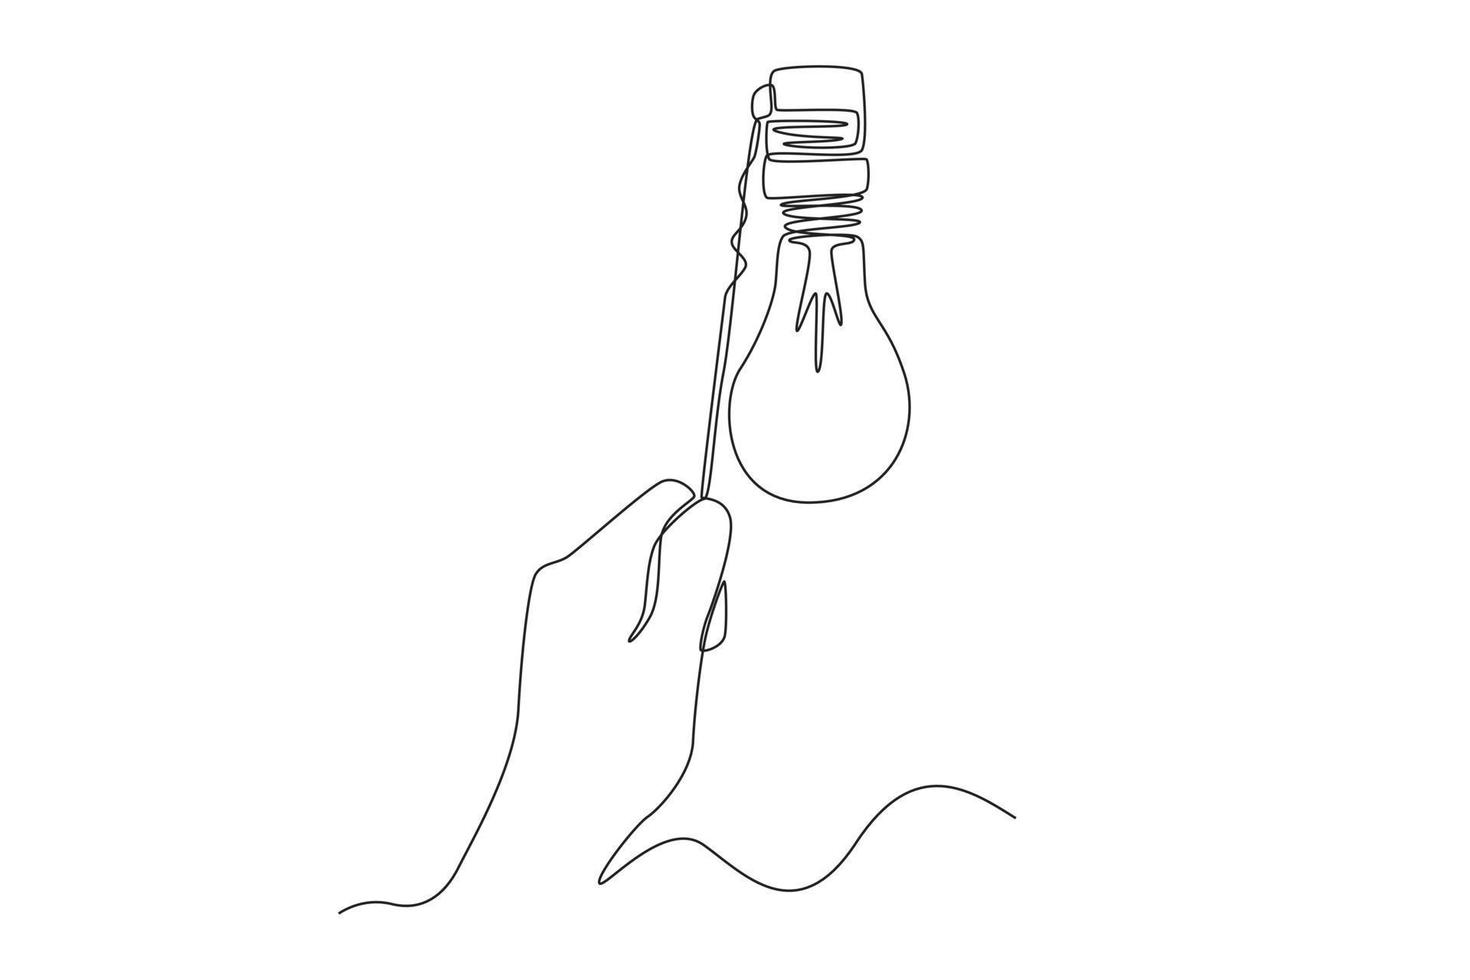 Single one line drawing hand turn off the lamp. Earth hour concept. Continuous line draw design graphic vector illustration.